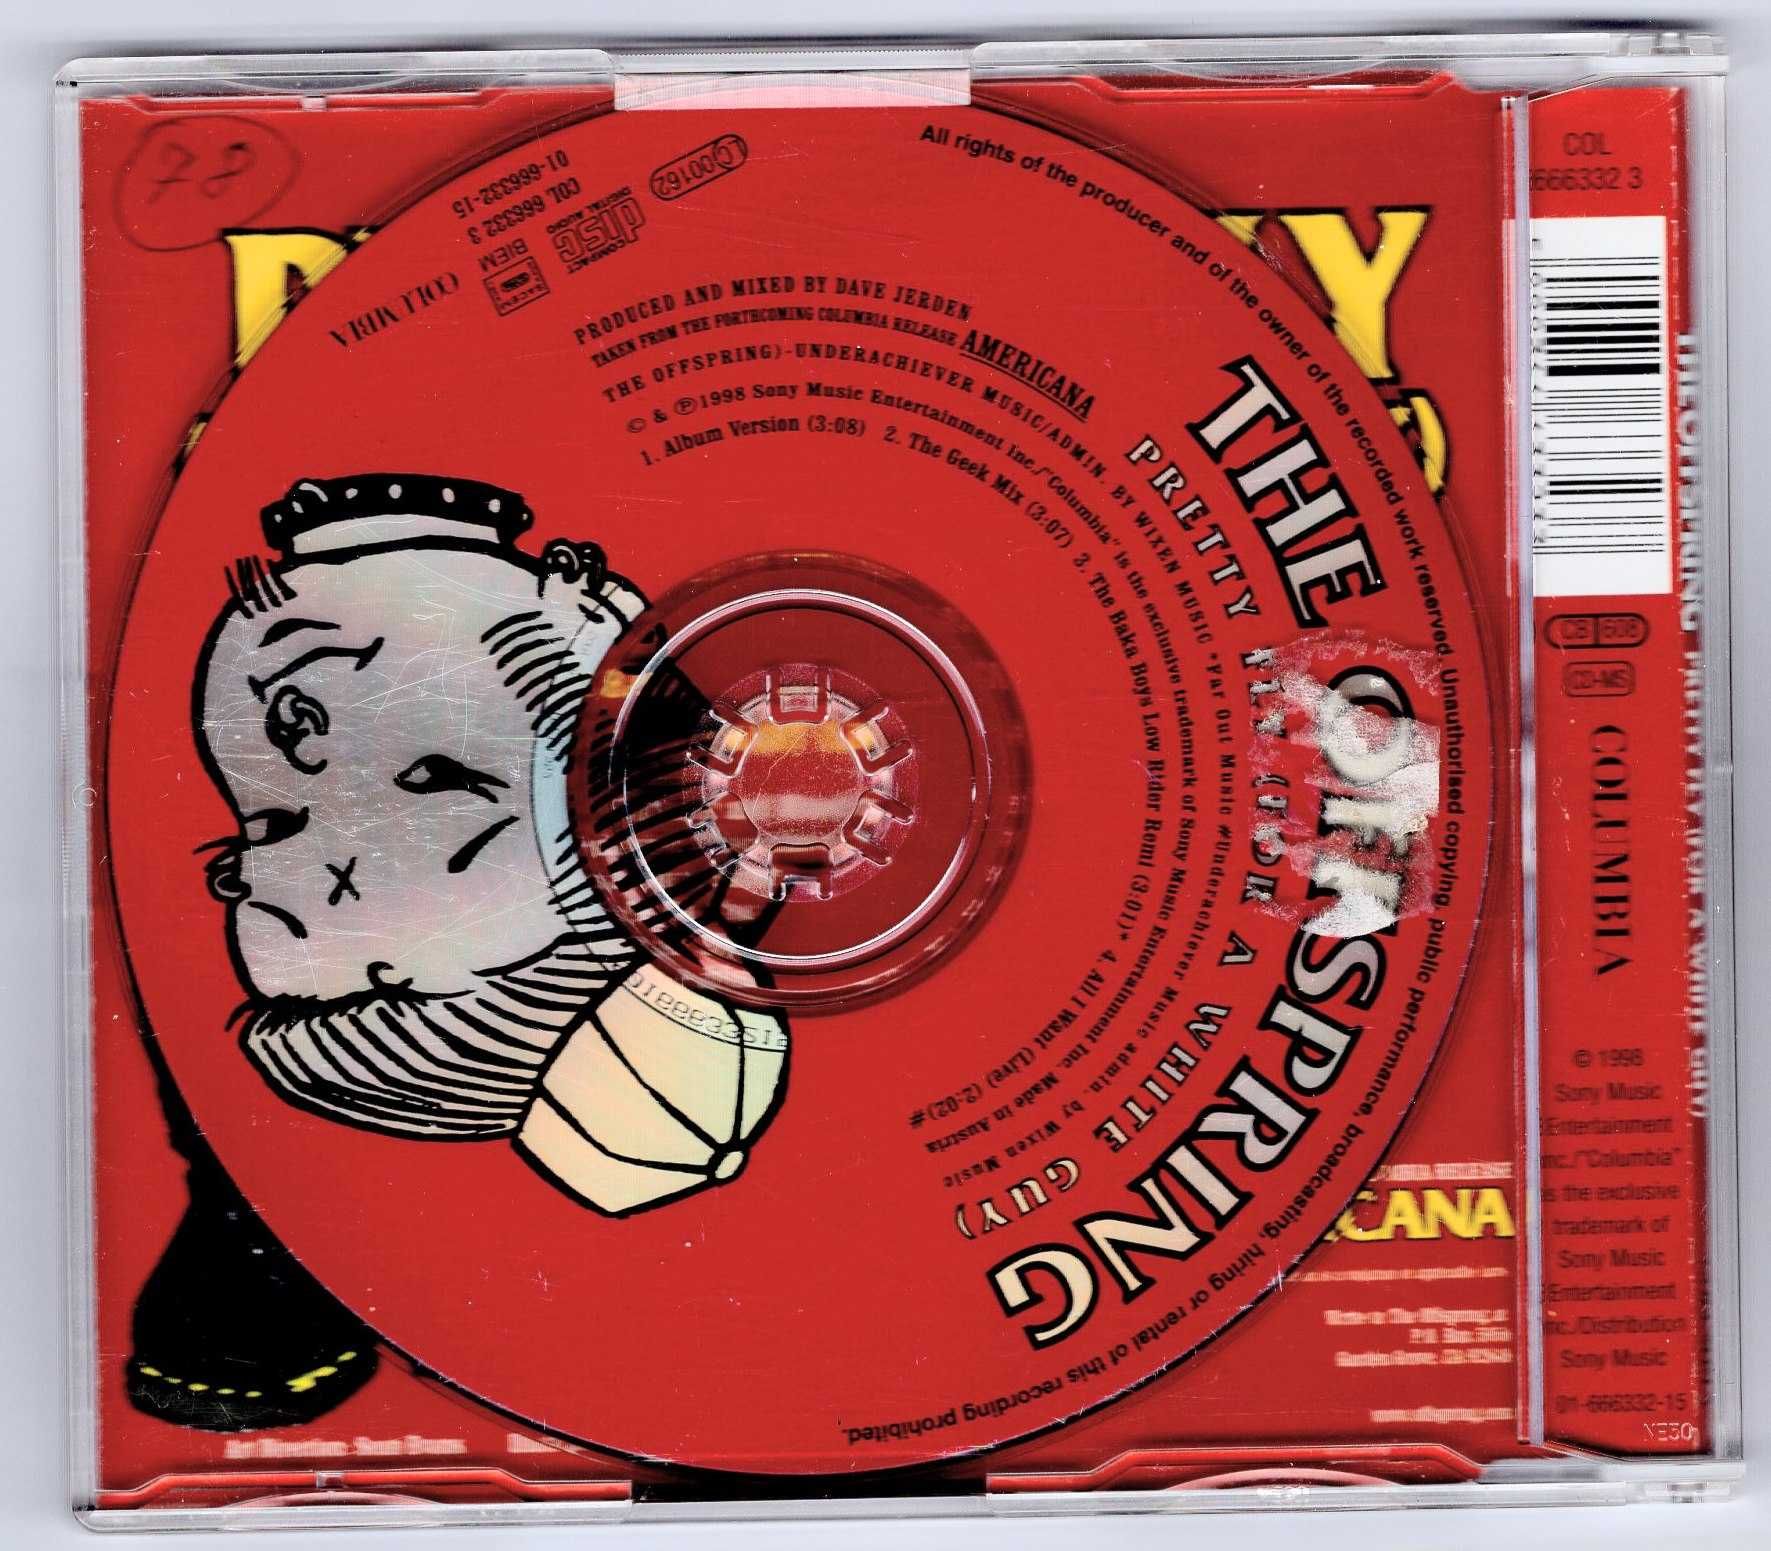 The Offspring - Pretty Fly (For A White Guy) (CD, Maxi Singiel)